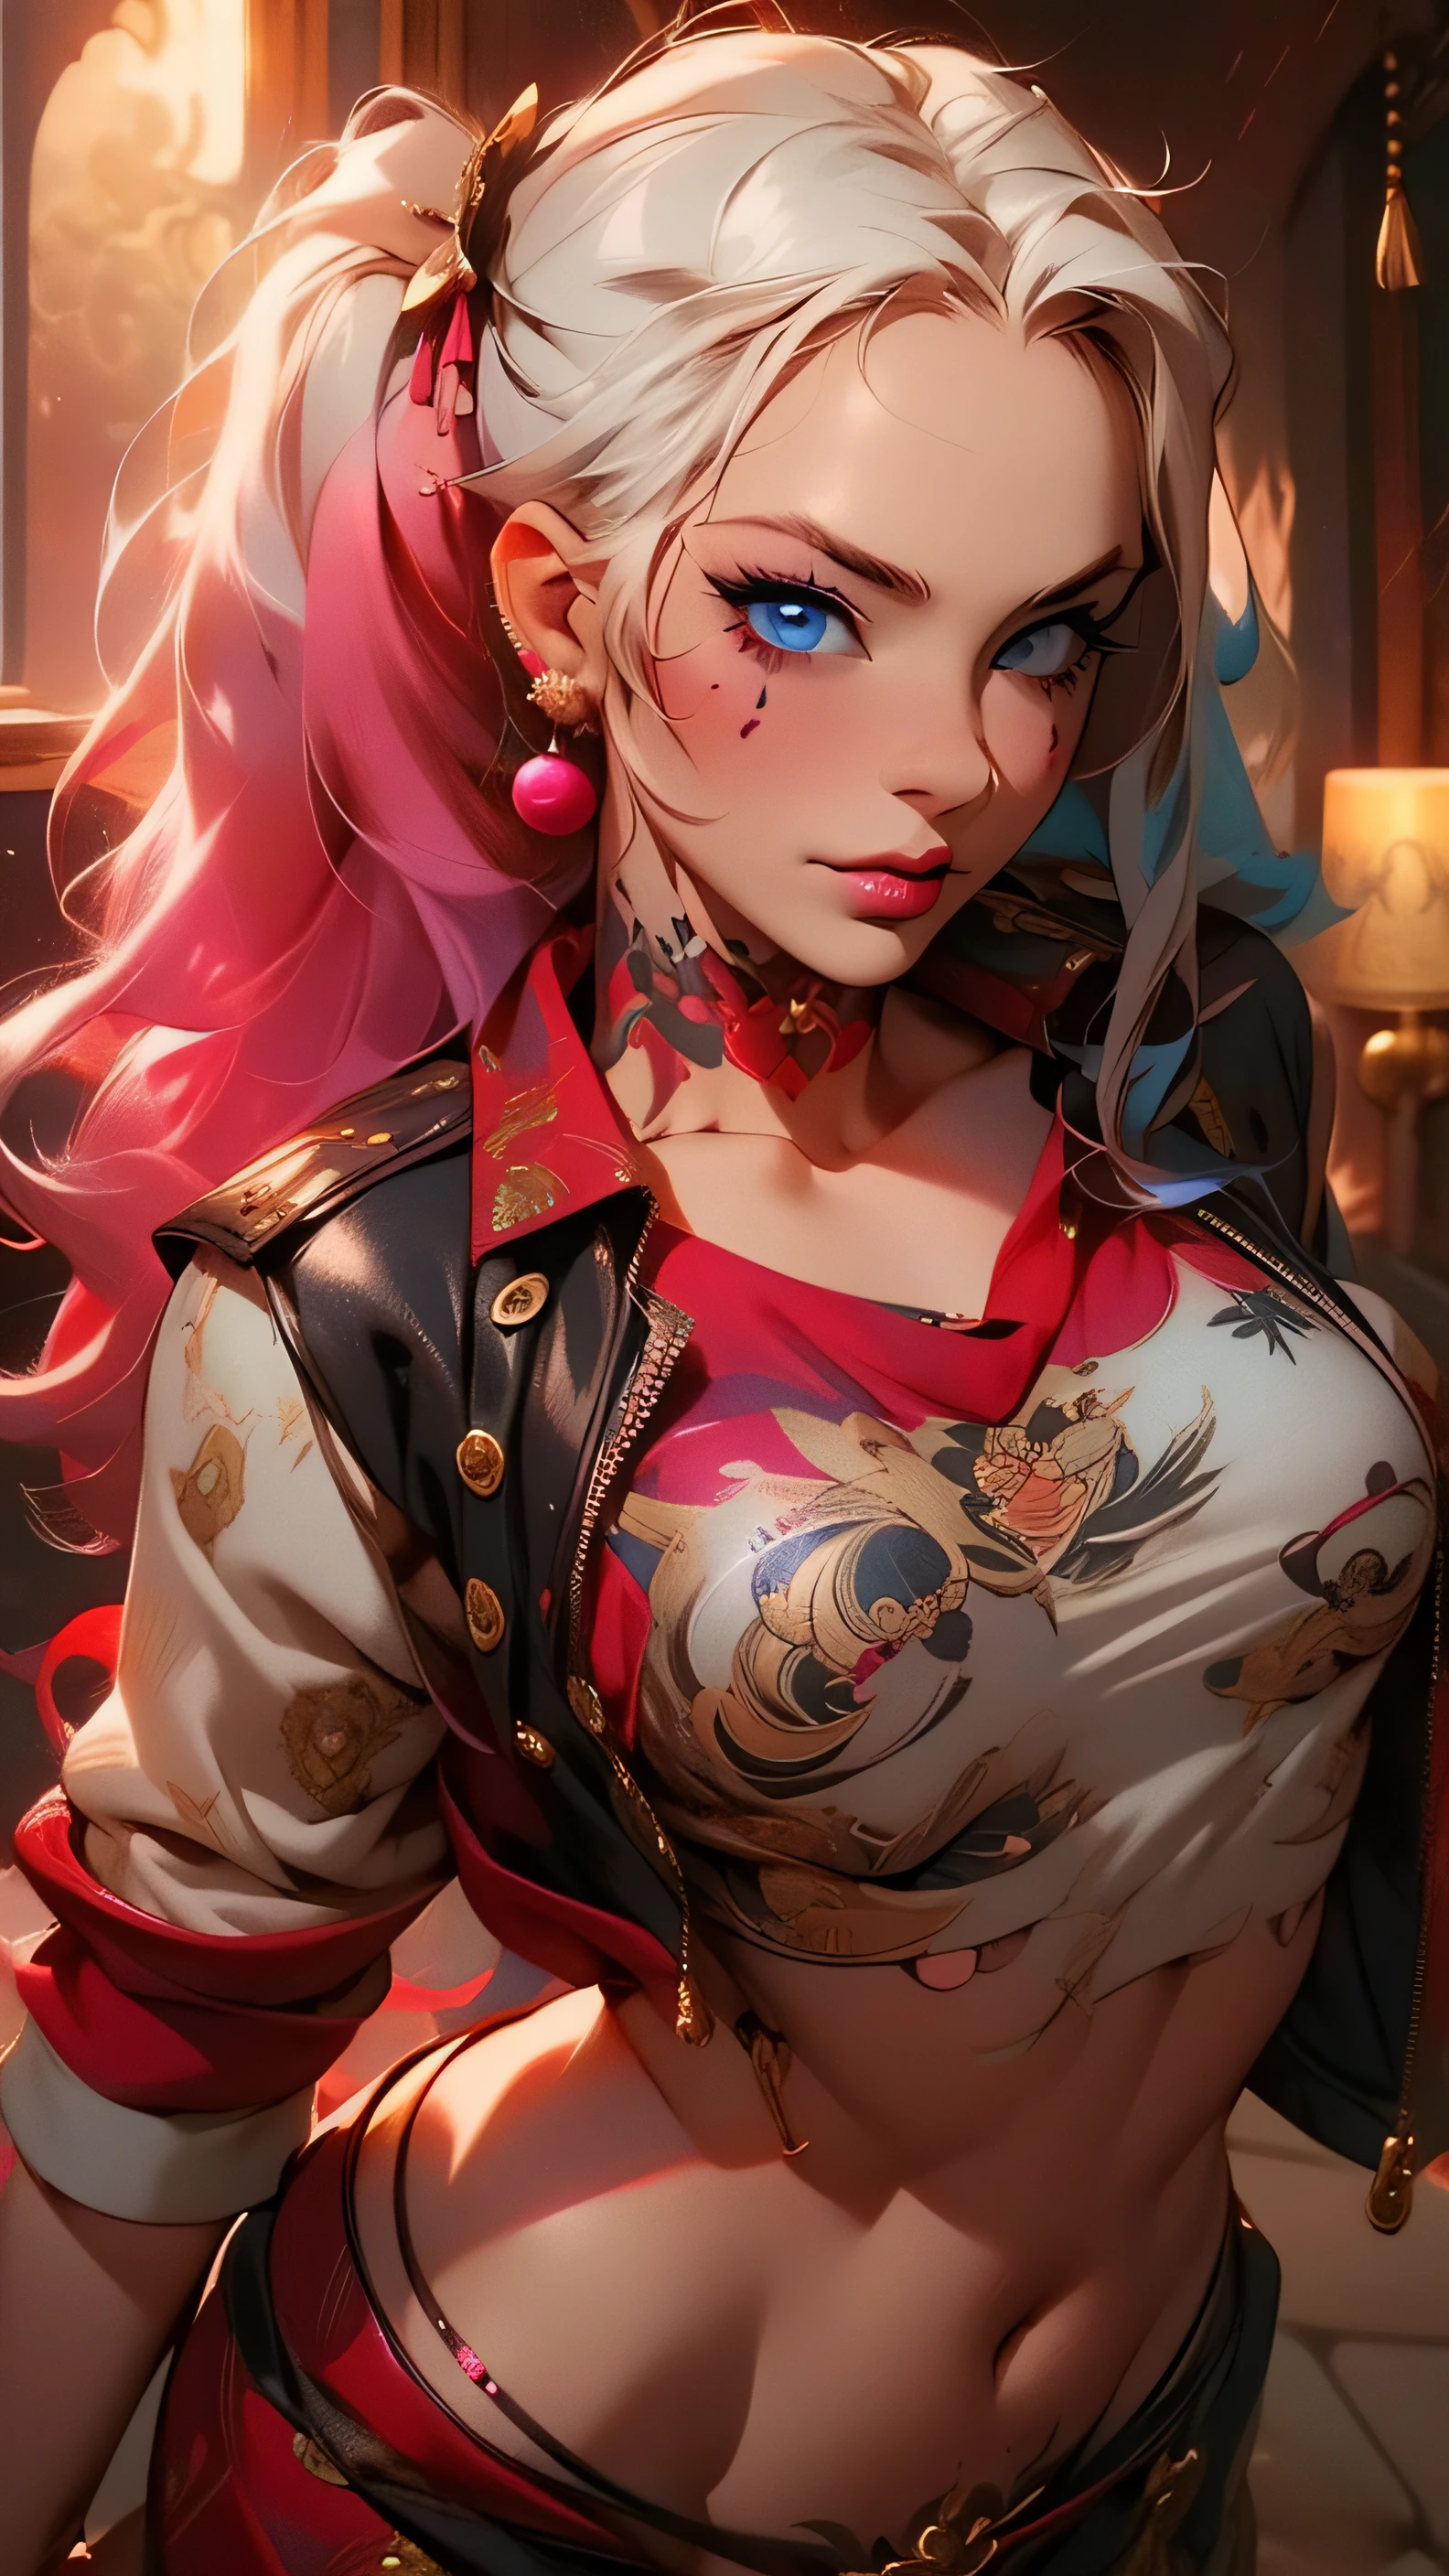 （masterpiece best quality：1.4），Clown Girl， （Tattooed with：1.5）， solo， hair flower， long whitr hair， eBlue eyes， looking at viewert， mediuml breasts， Tattooed with， brunette color hair， nipple tassels， exposed bare shoulders， By bangs， 耳Nipple Ring， inside in room， nape， cropped shoulders， jewely， eyeslashes， cparted lips， contours， hair-bun， nipple piercing， single hair bun，